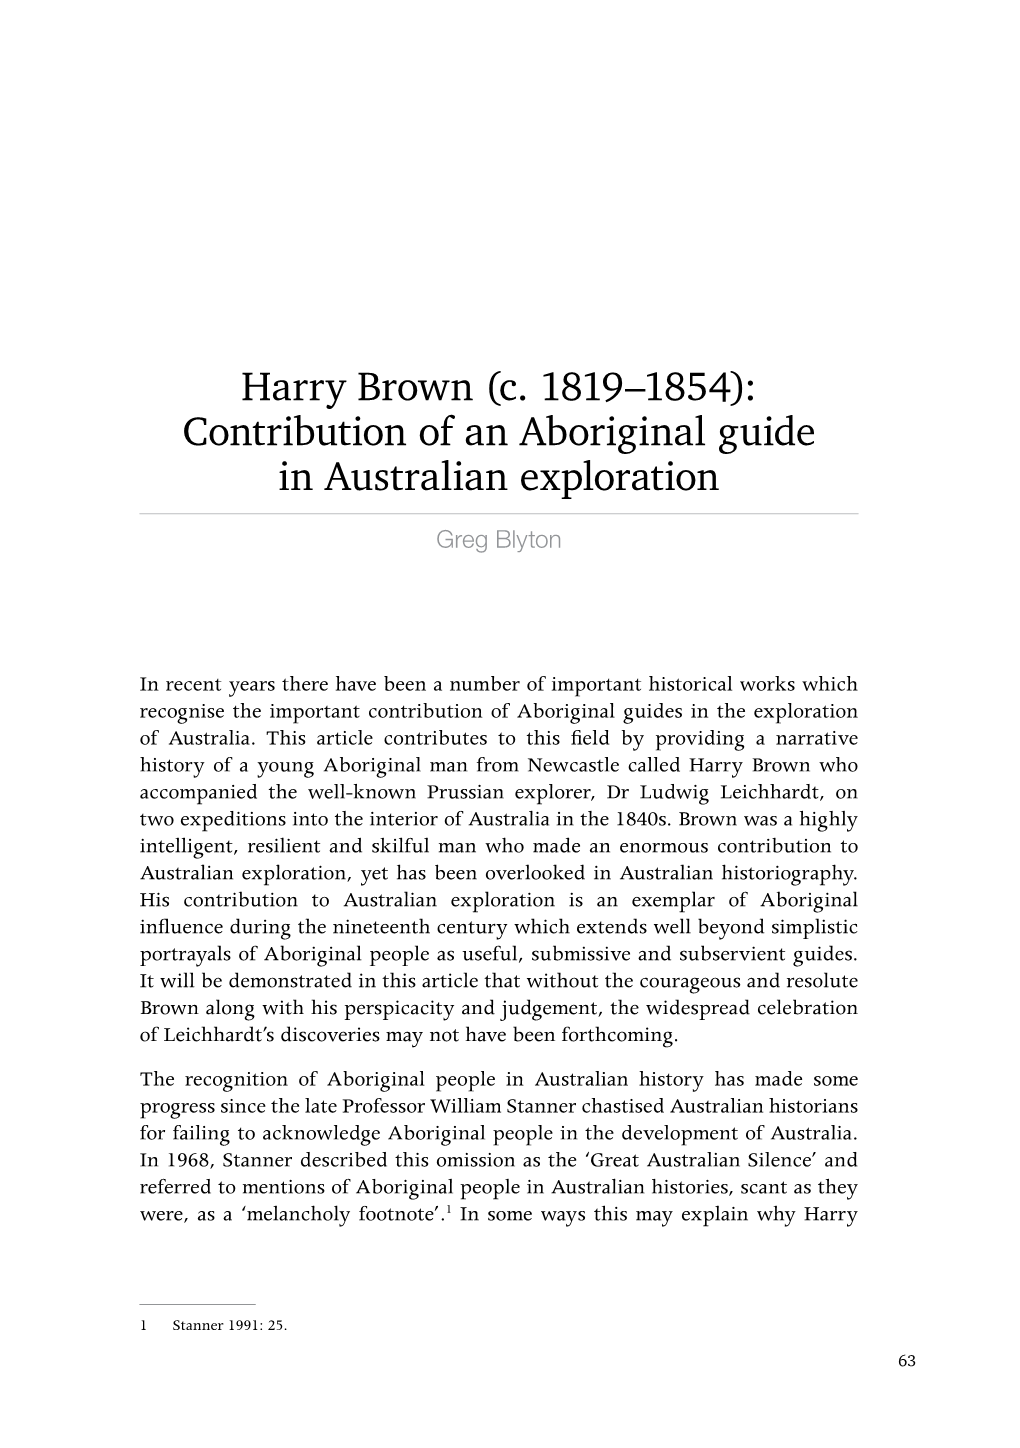 Harry Brown (C. 1819–1854): Contribution of an Aboriginal Guide in Australian Exploration Greg Blyton